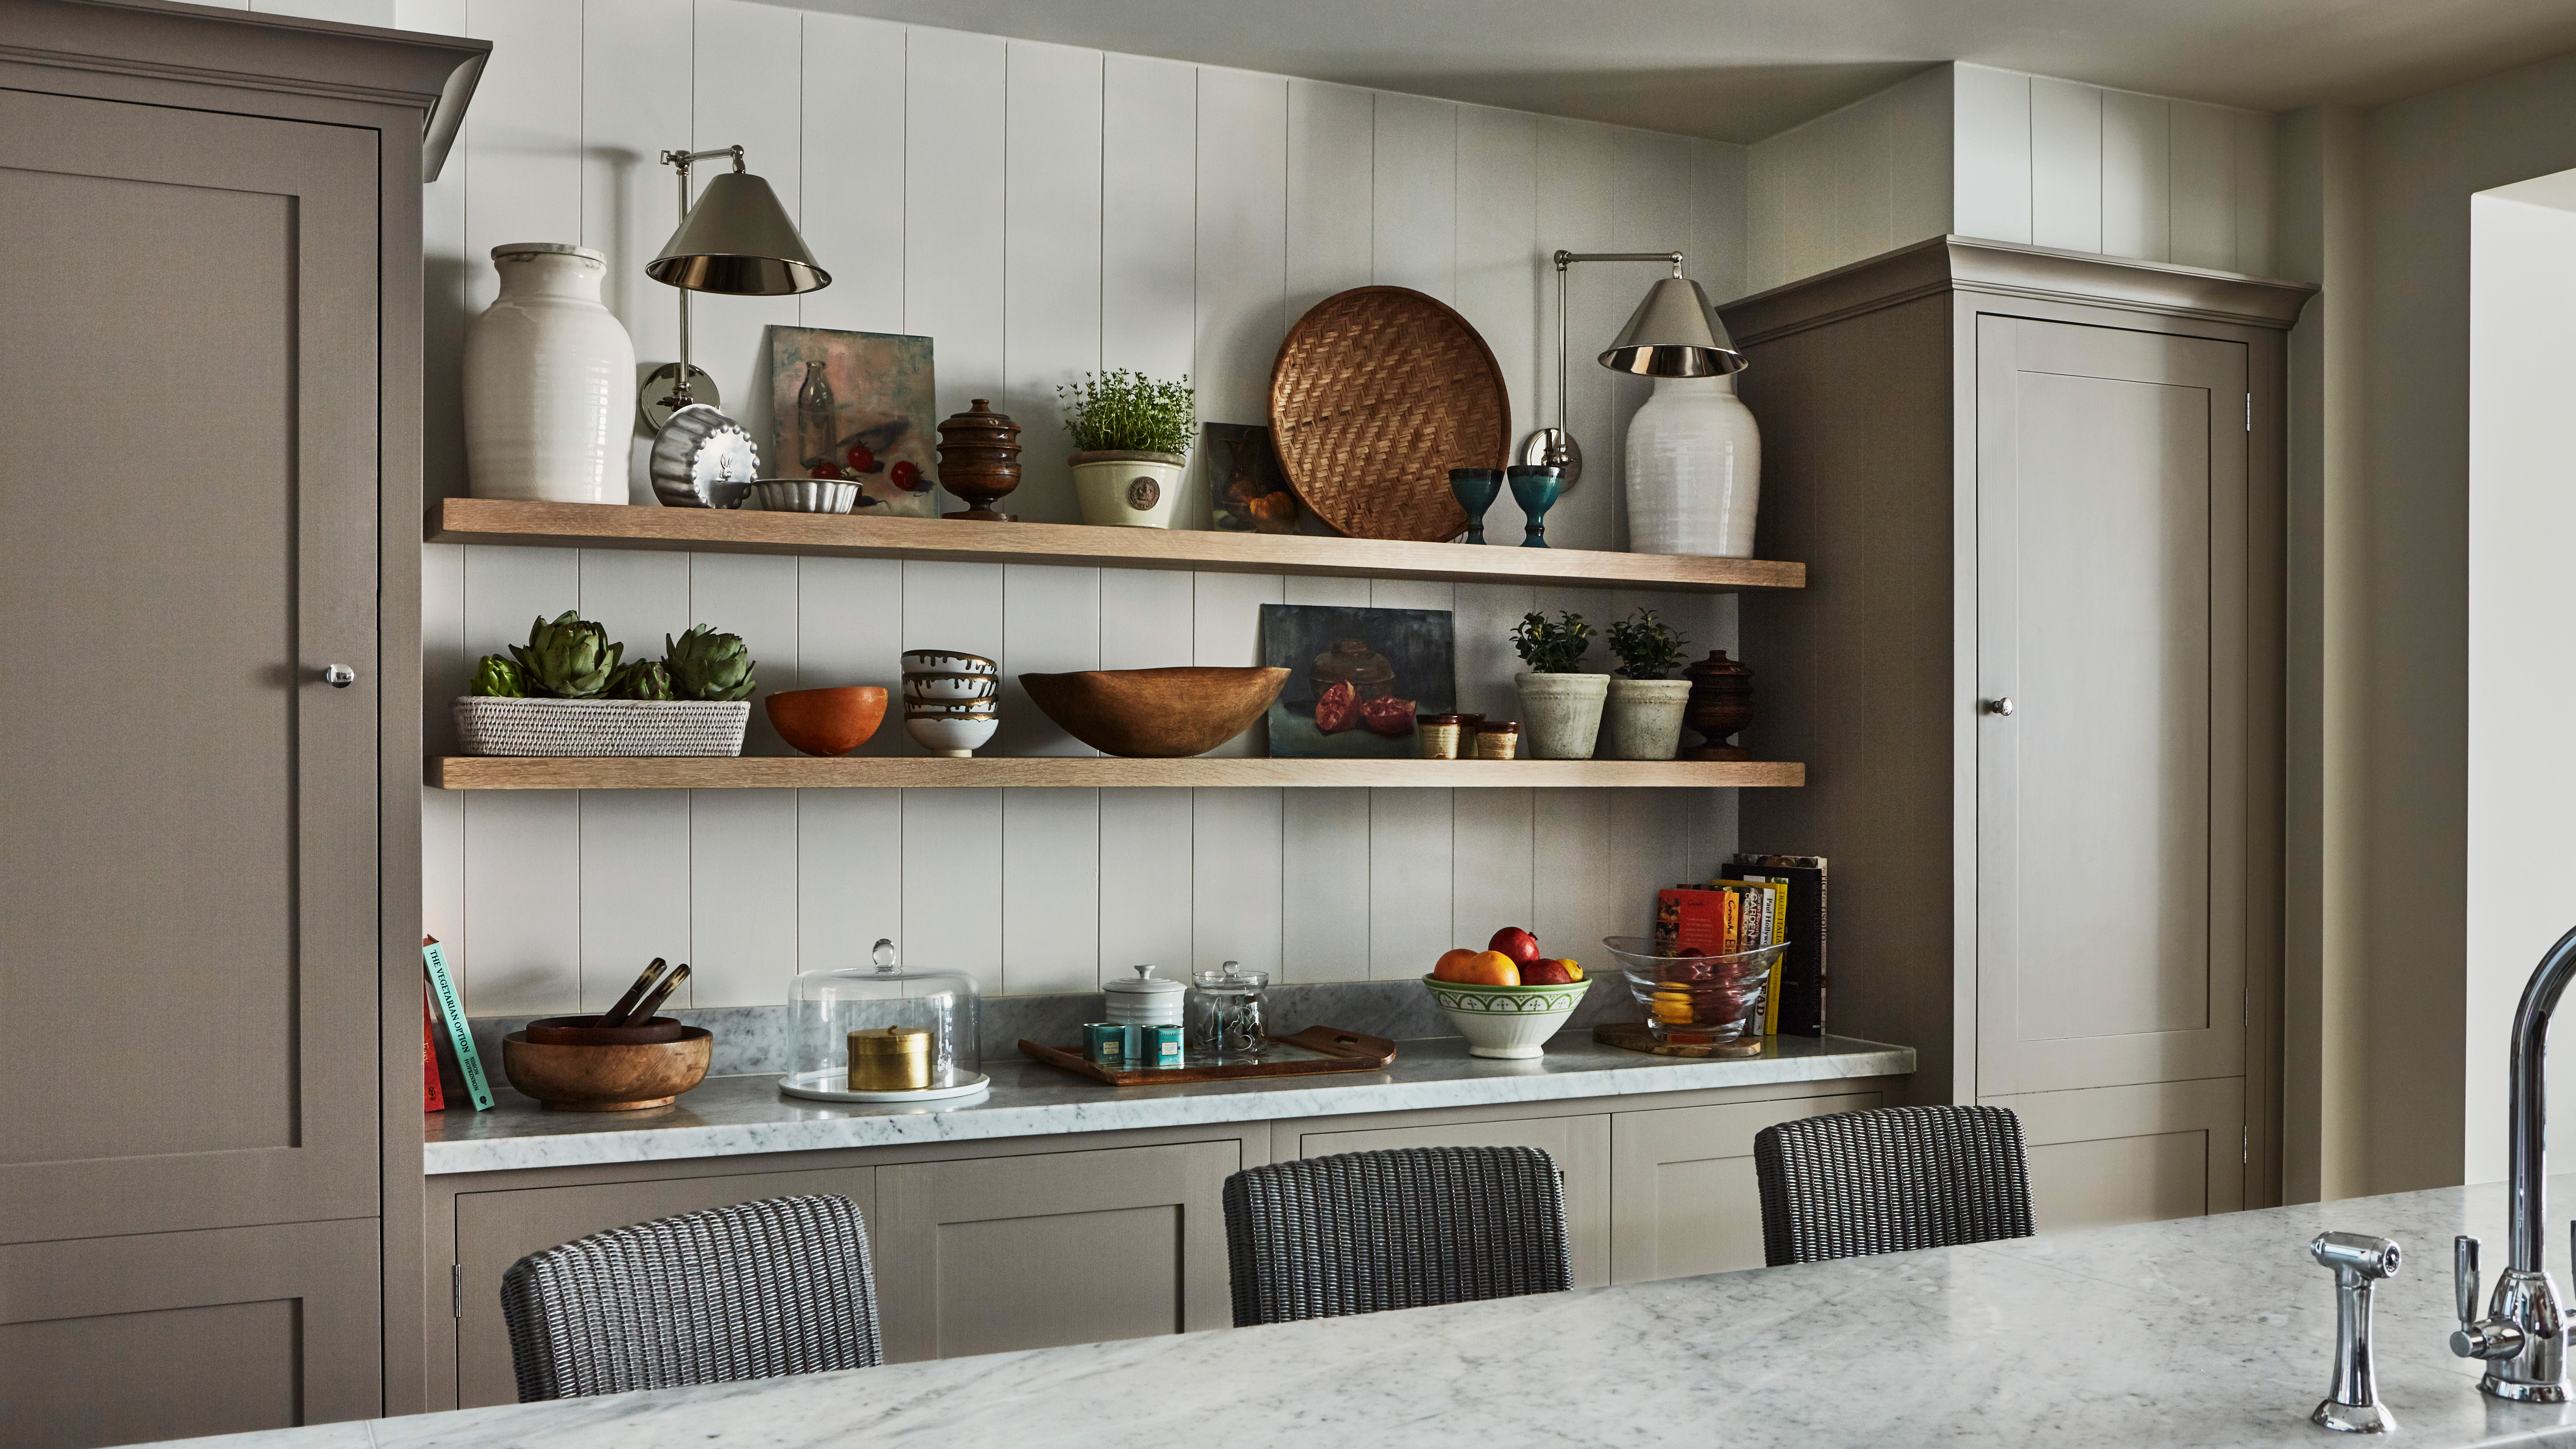 kitchen shelving ideas: 14 ways to boost storage and display space |